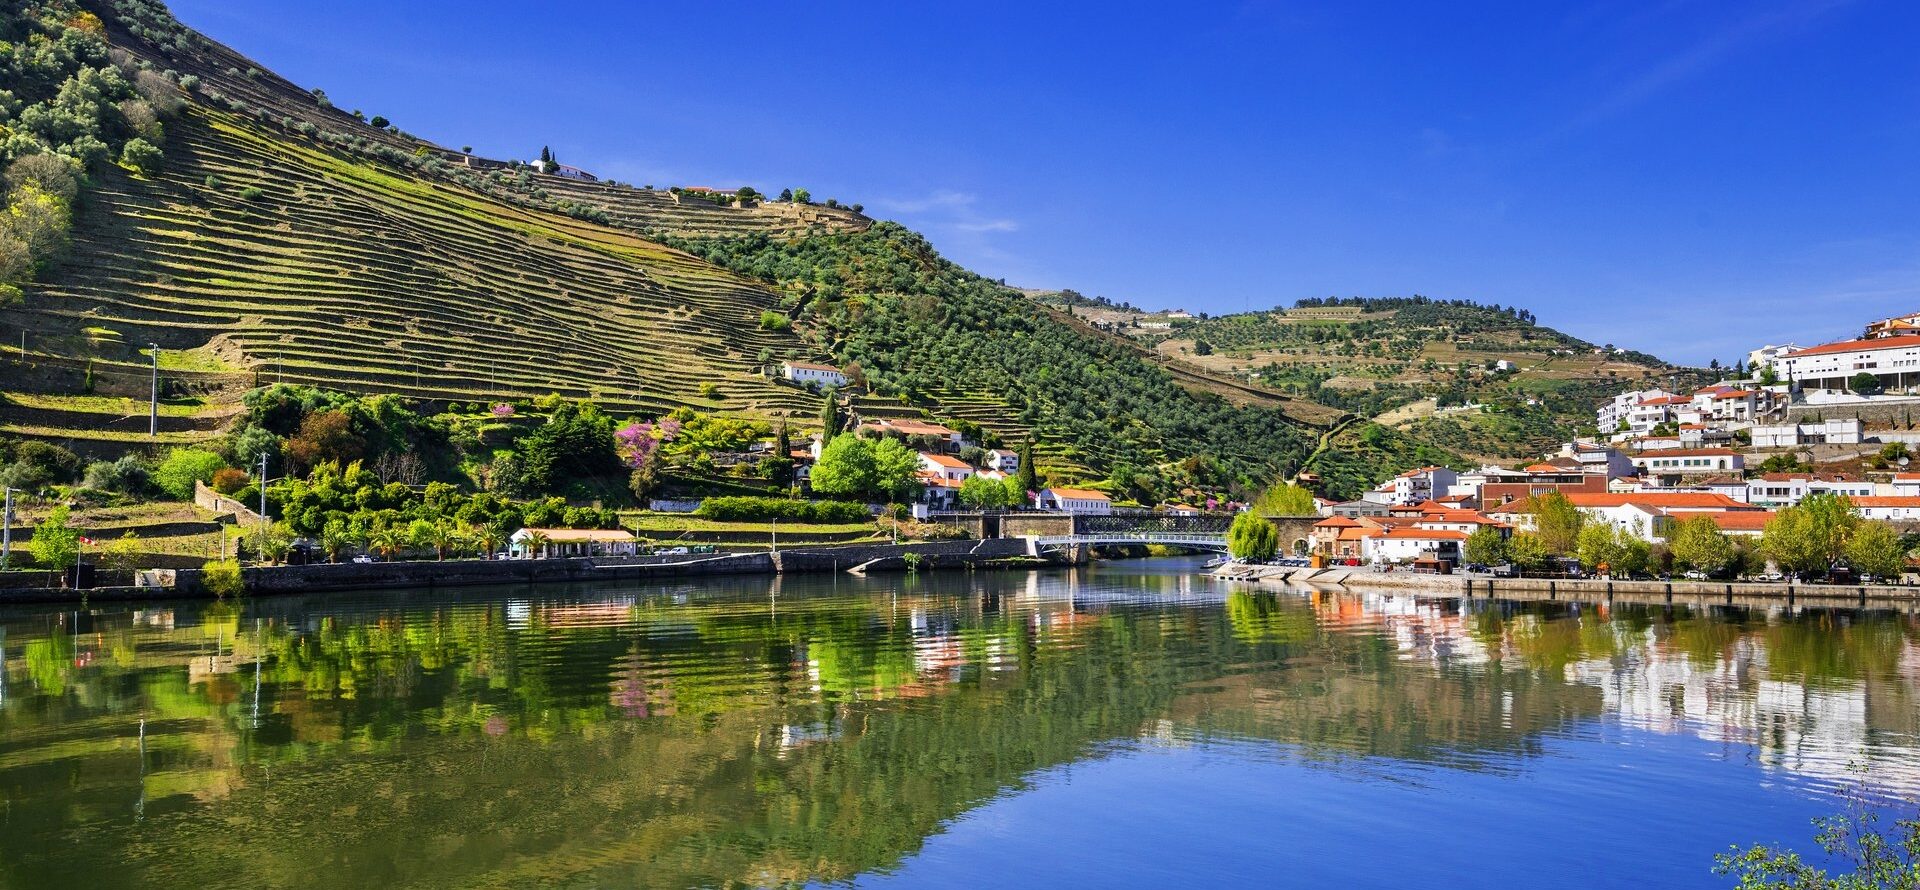 https://www.celebritycruises.com/blog/content/uploads/2021/09/what-is-portugal-famous-for-douro-river-valley-hero-1920x890.jpg